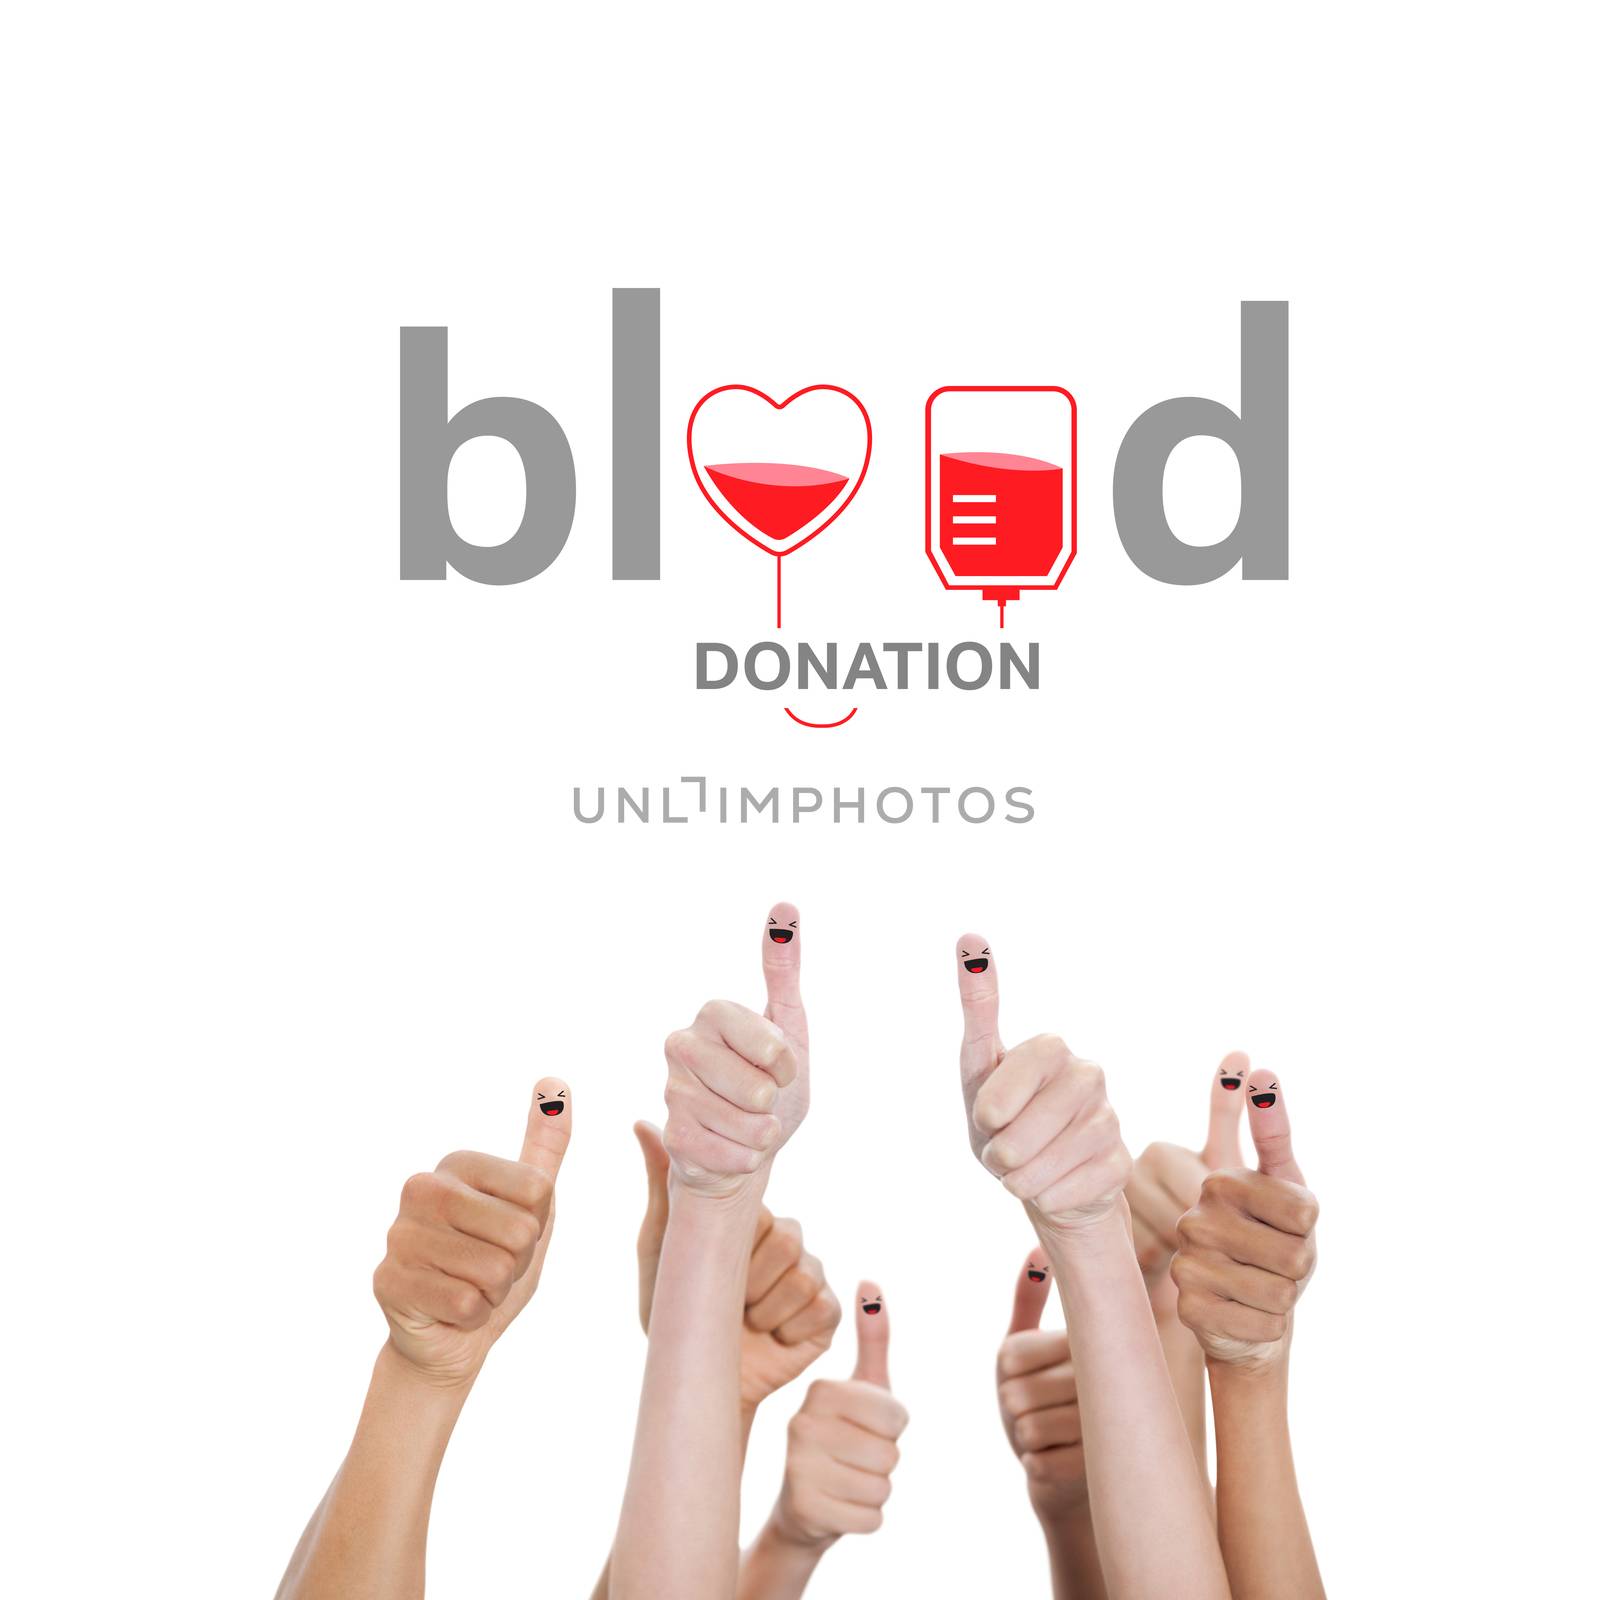 Blood donation against hands showing thumbs up